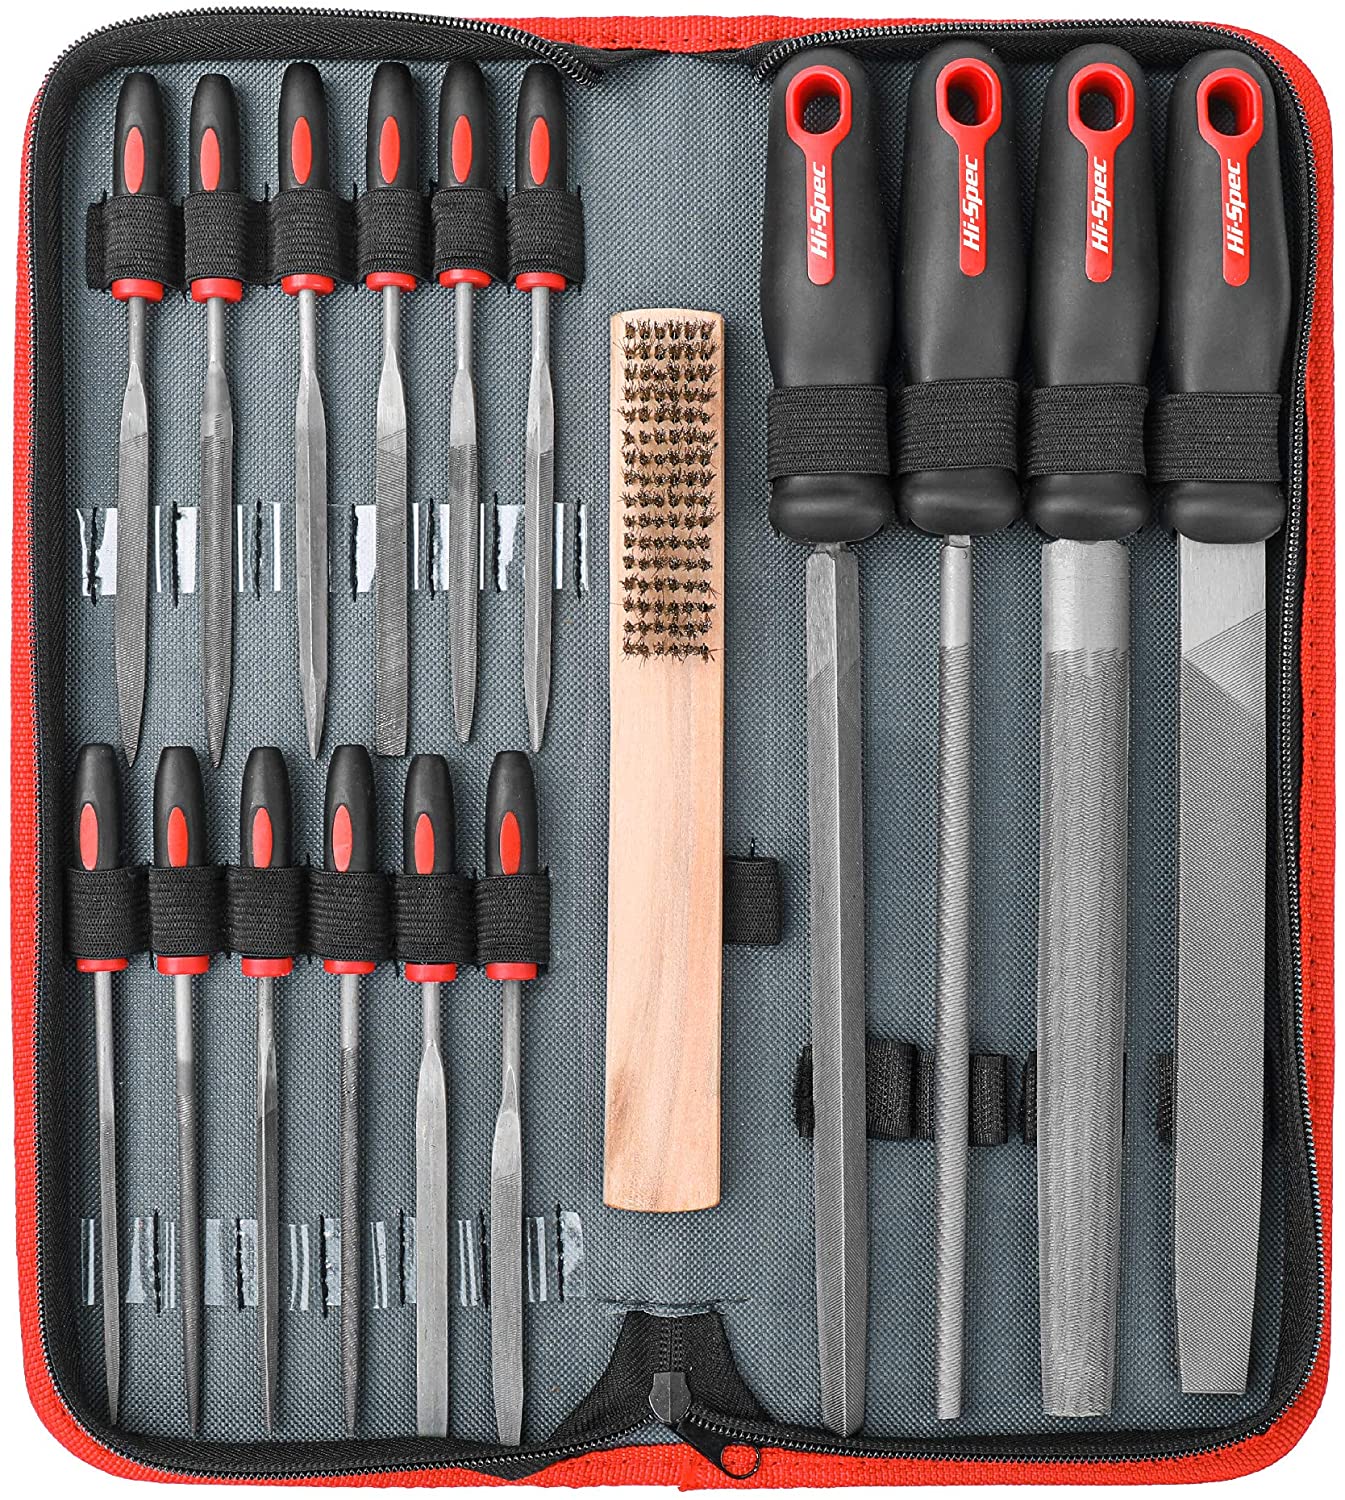 Draper Engineers Hand/Needle File Tool Set with Black Canvas Carrying Case 16 Pc